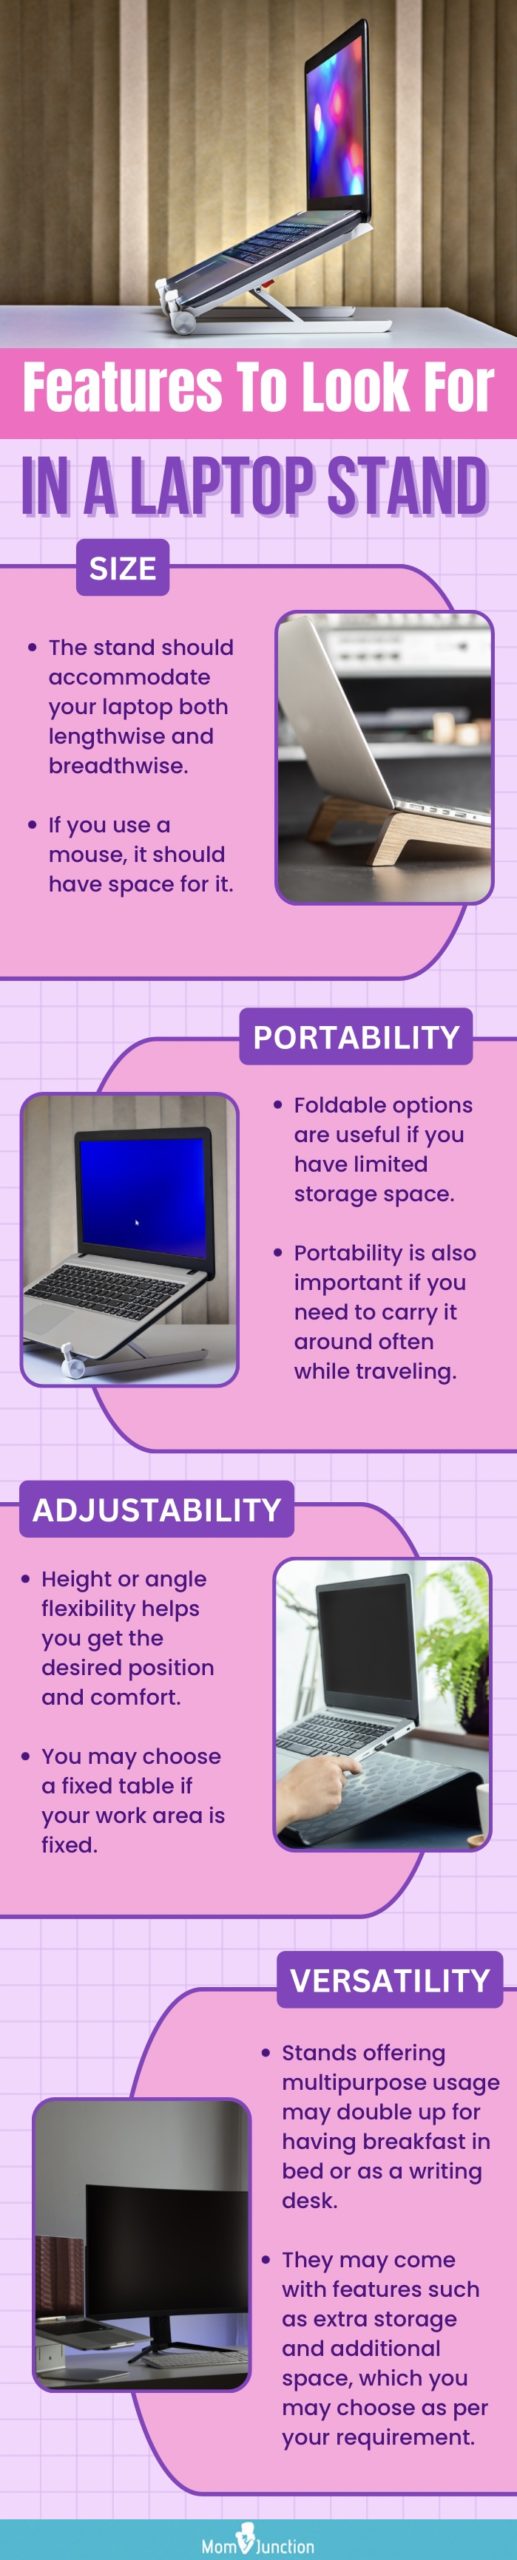 Features To Look For In A Laptop Stand (infographic)